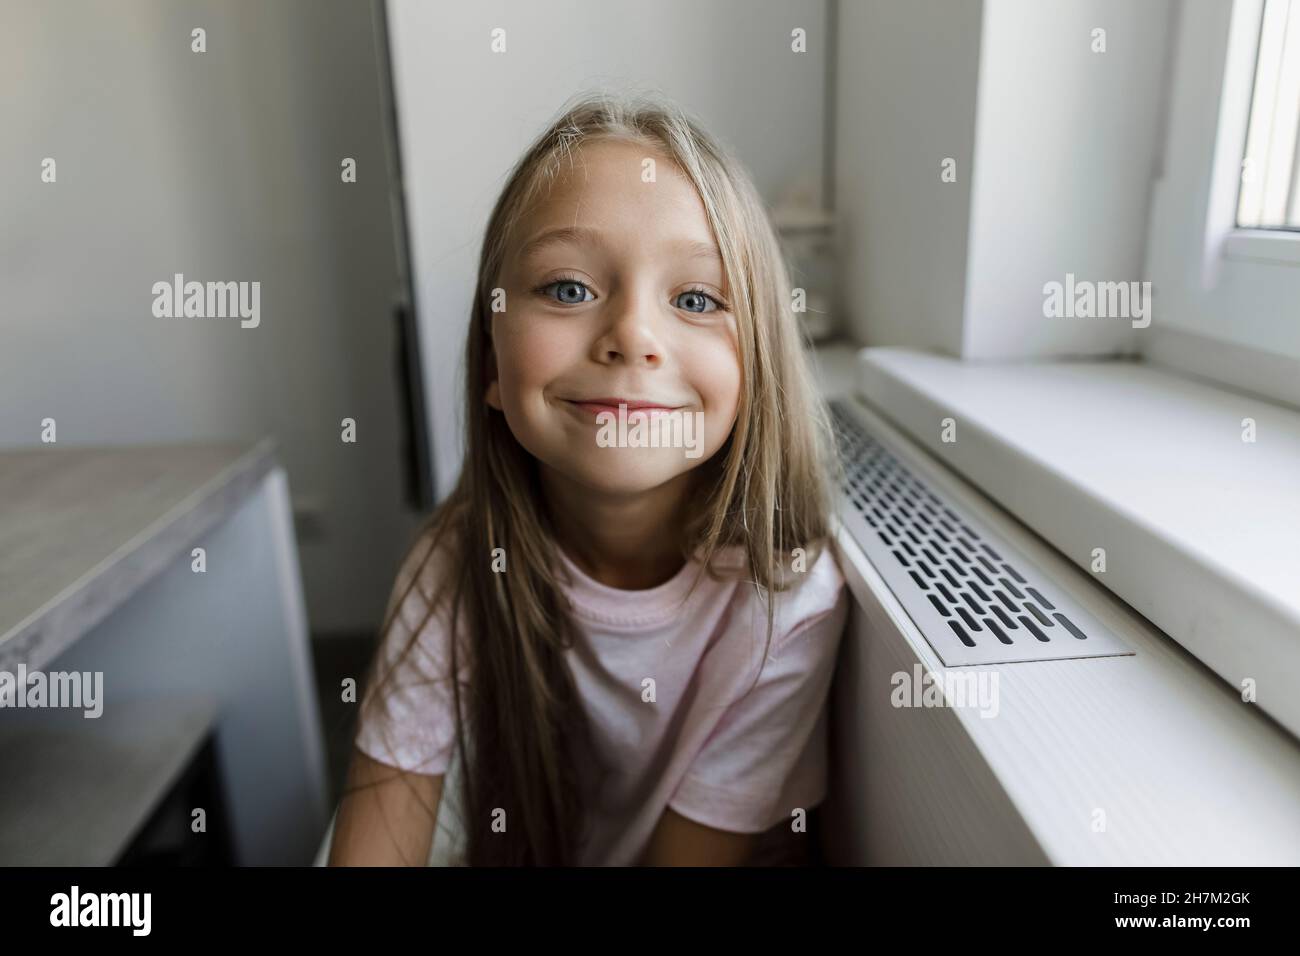 Smiling blond girl sitting at window Stock Photo